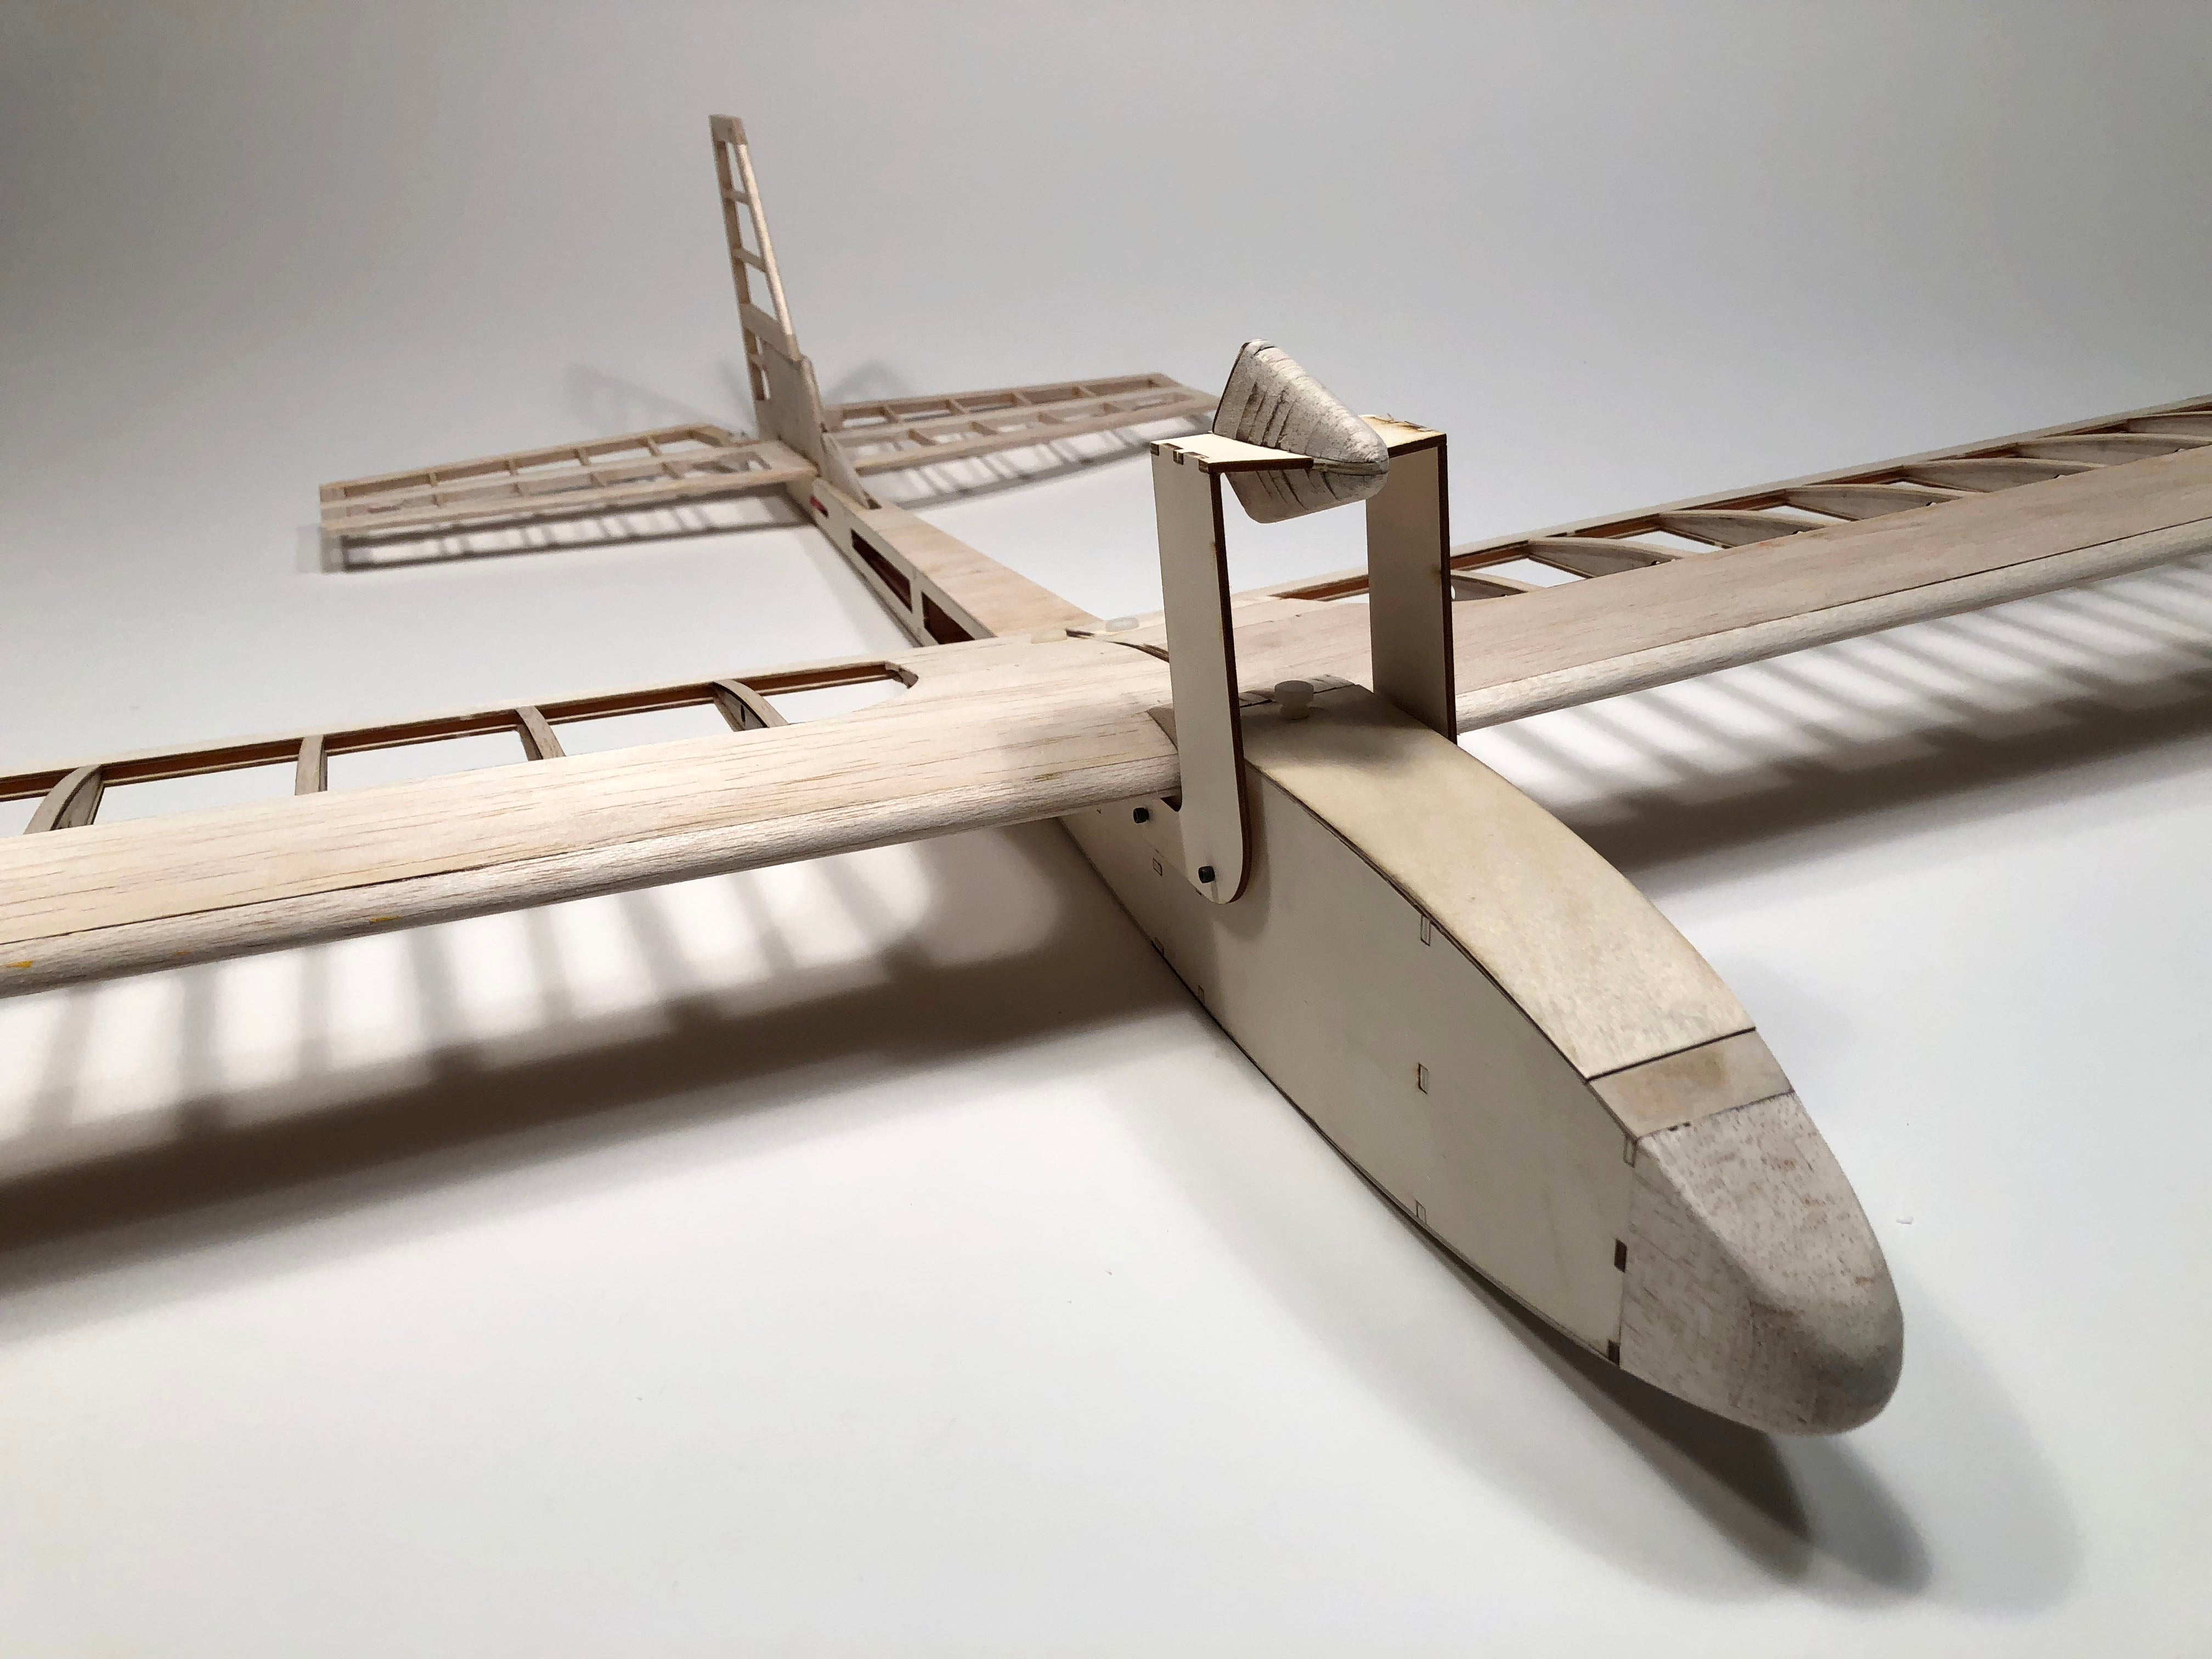 Wire bender model aeroplane aircraft undercarriage